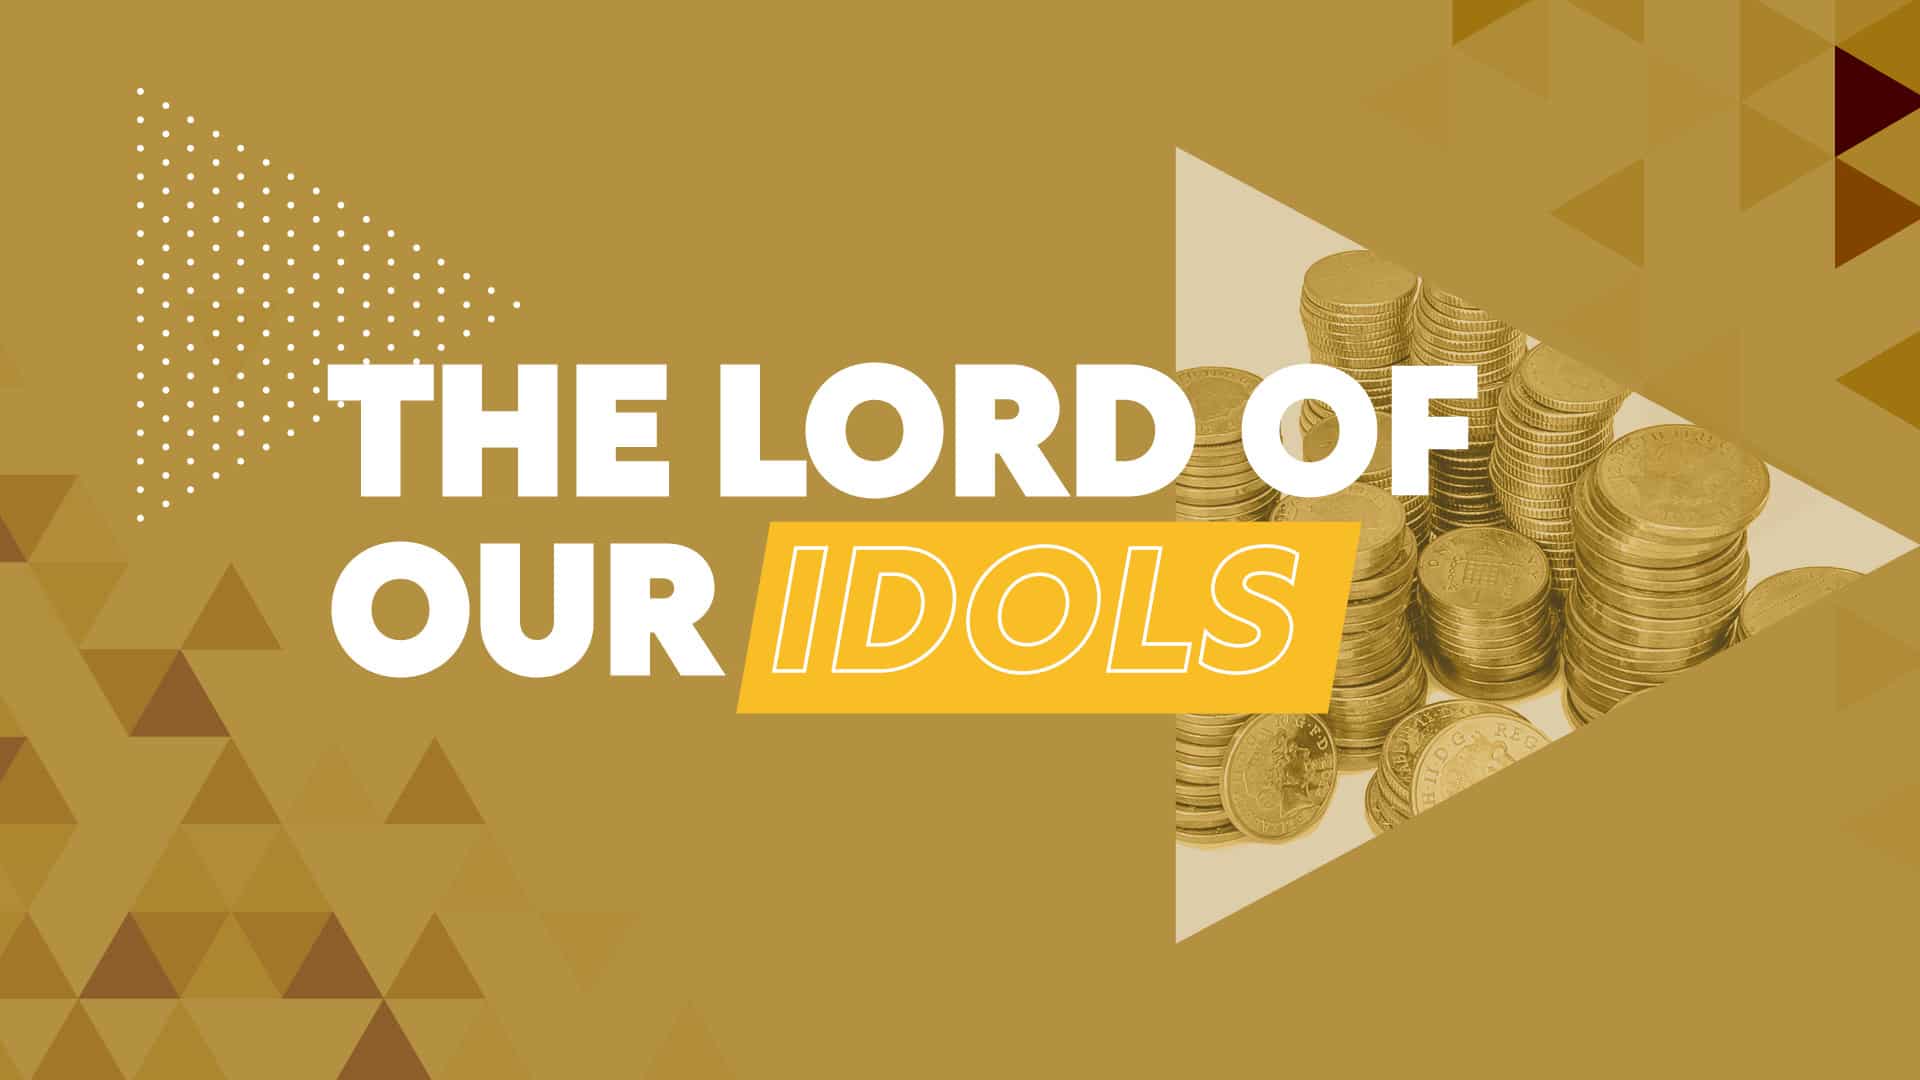 The Lord of our Idols